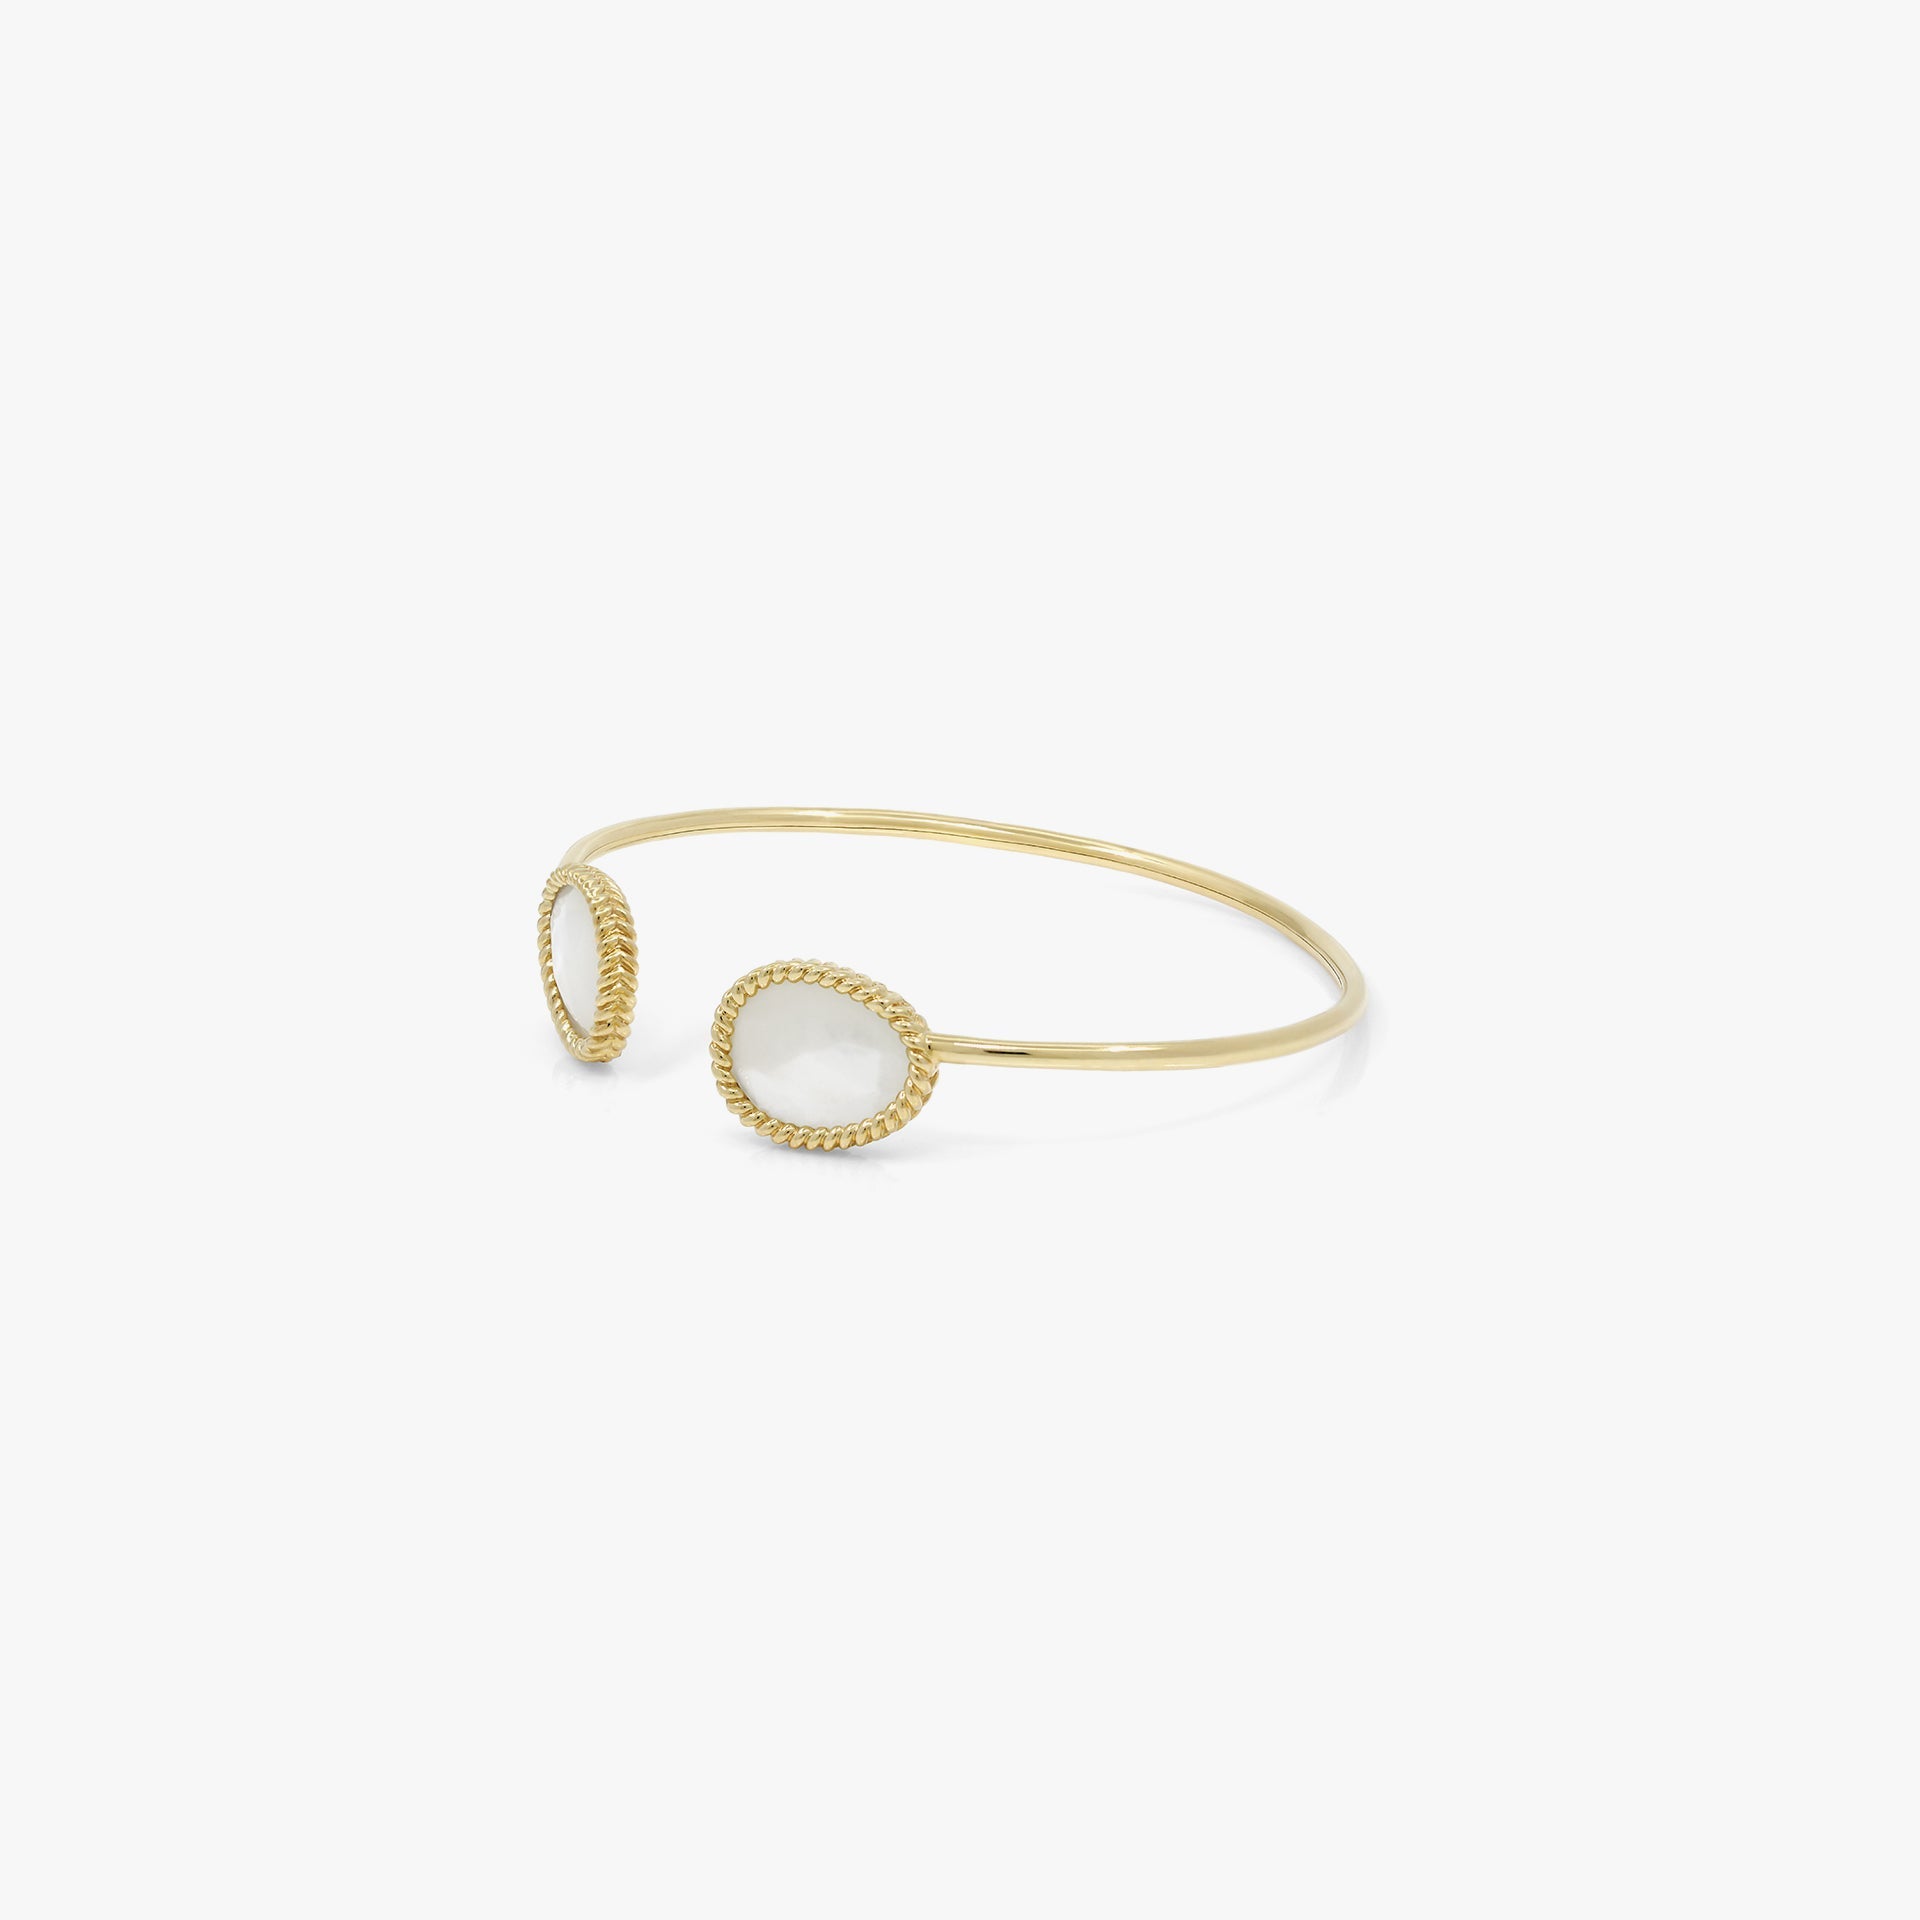 Nina Mariner Double Stone Bangle In 18 Karat Yellow Gold With Mother Of Pearl Stones